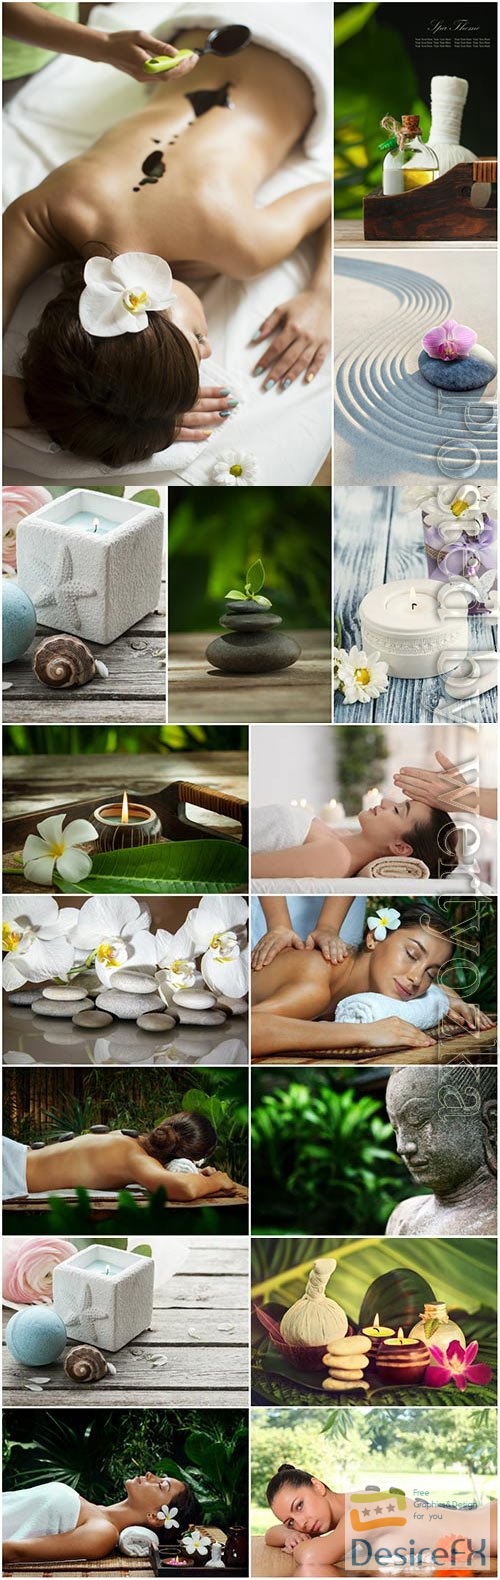 Health and relaxation concept, spa composition stock photo